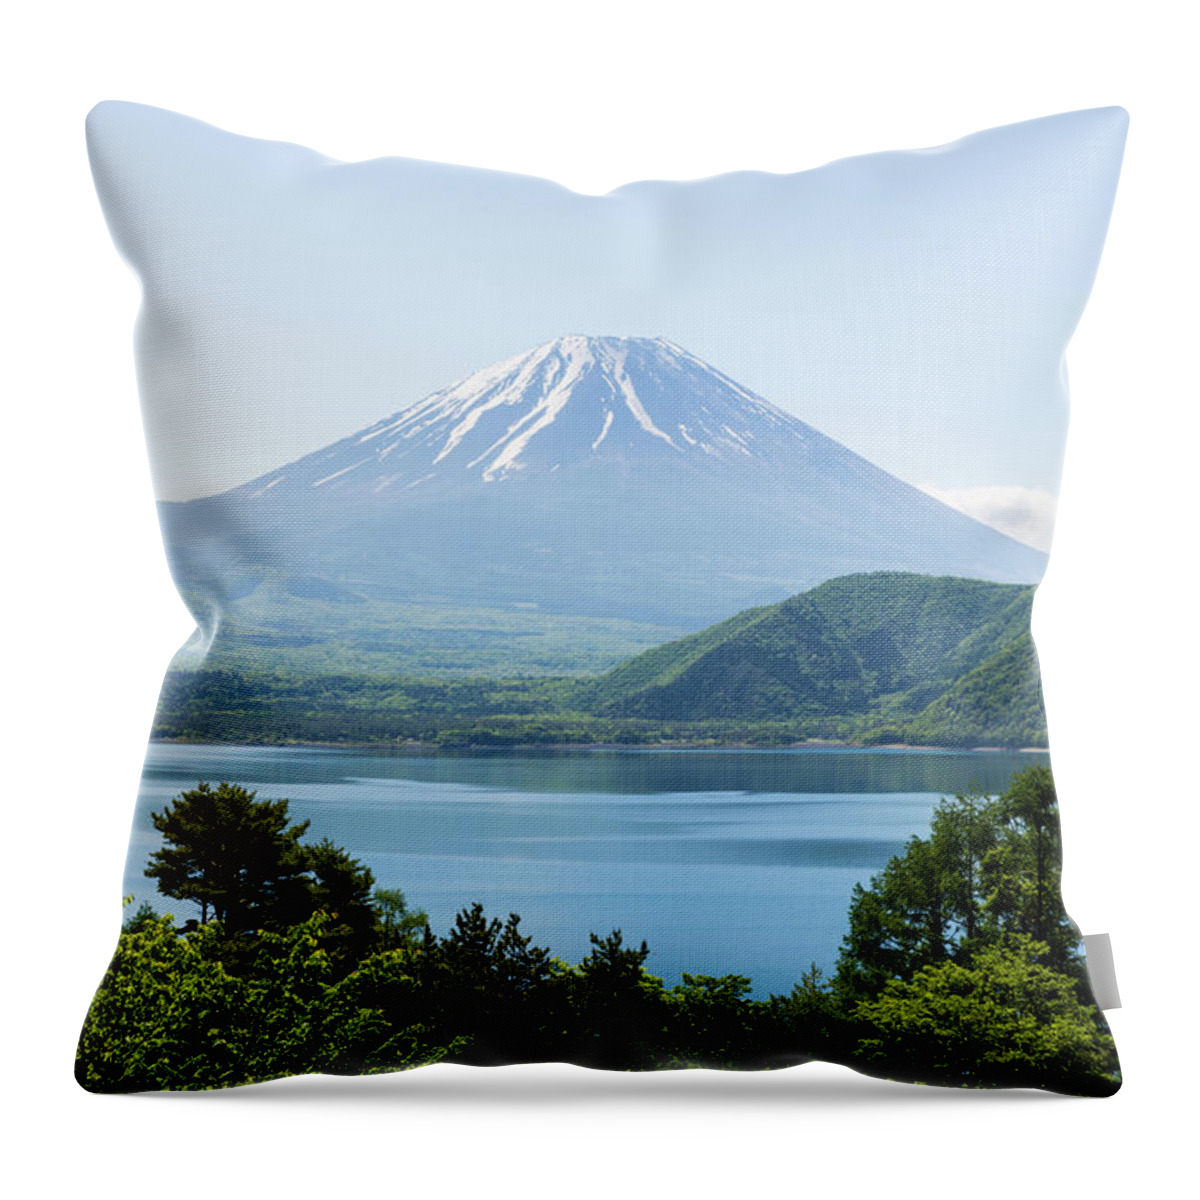 Tranquility Throw Pillow featuring the photograph Mount Fuji And Motosuko, Yamanashi by Ultra.f